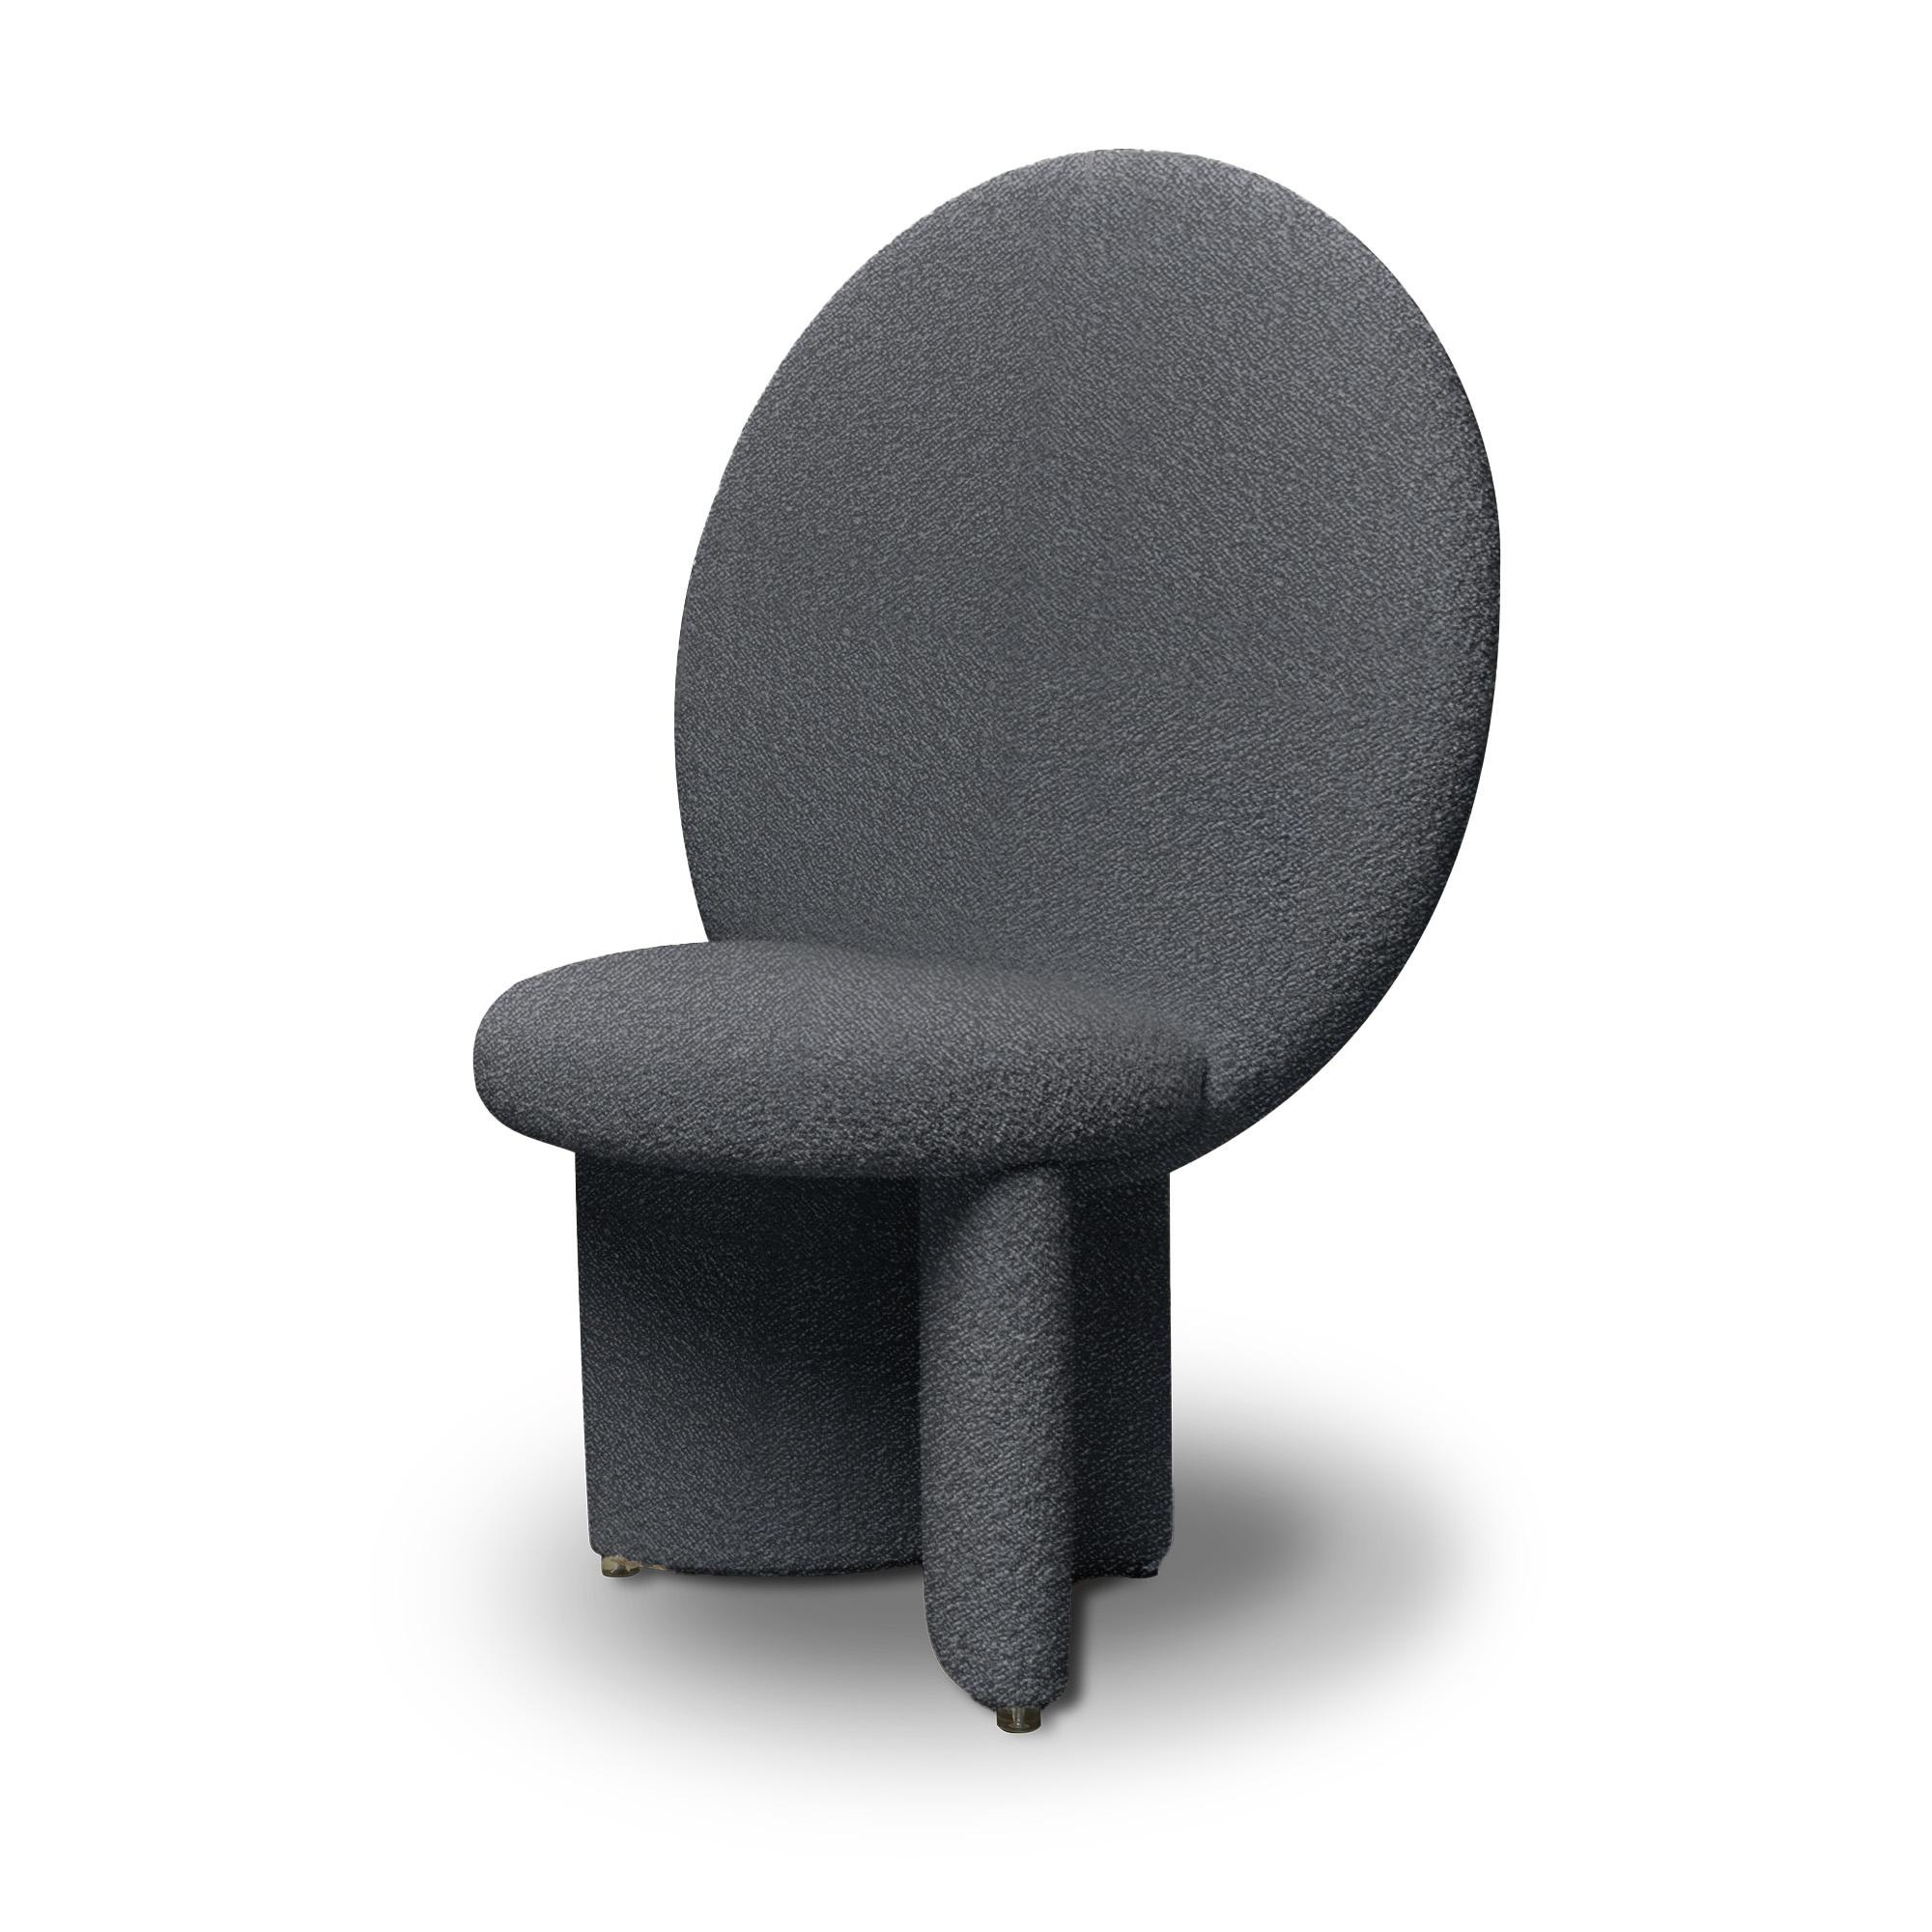 Afternoon chair has the majesty of a throne, with the huge circular backrest that reaches out and upwards, its legs curve to join the seat at angles. The chair is completely upholstered with soft, textural bouclé fabric.